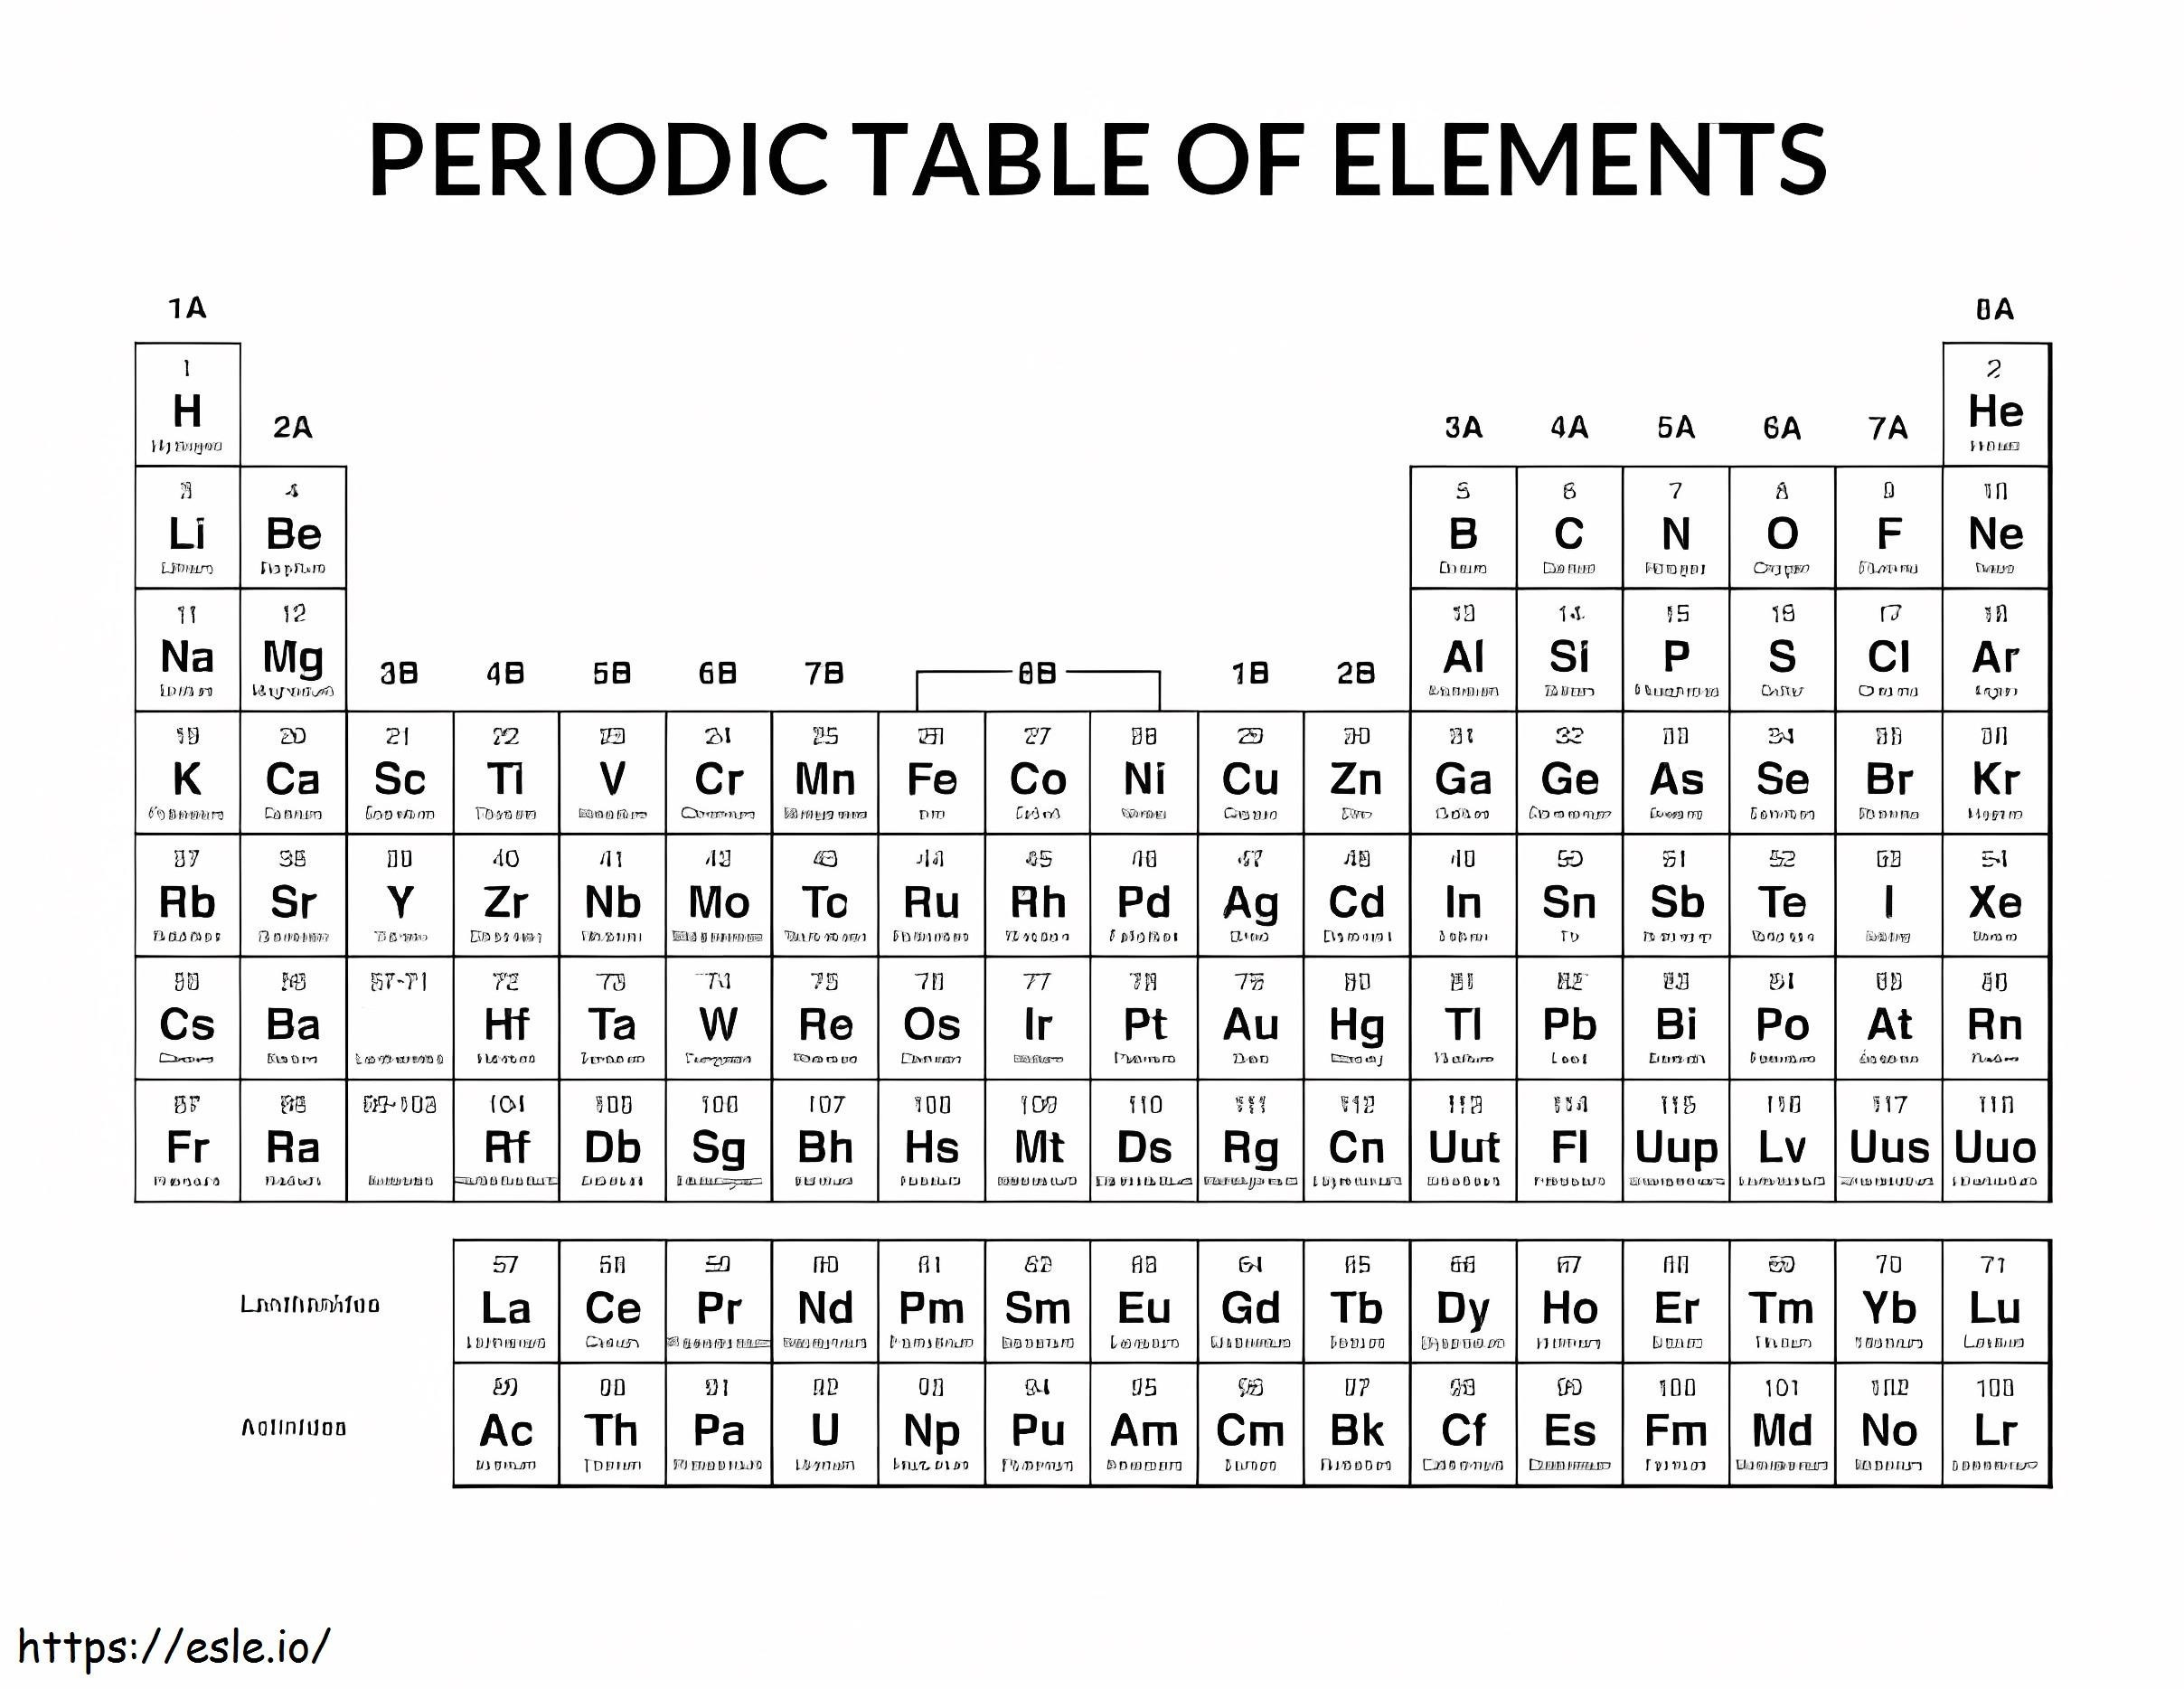 The Periodic Table coloring page